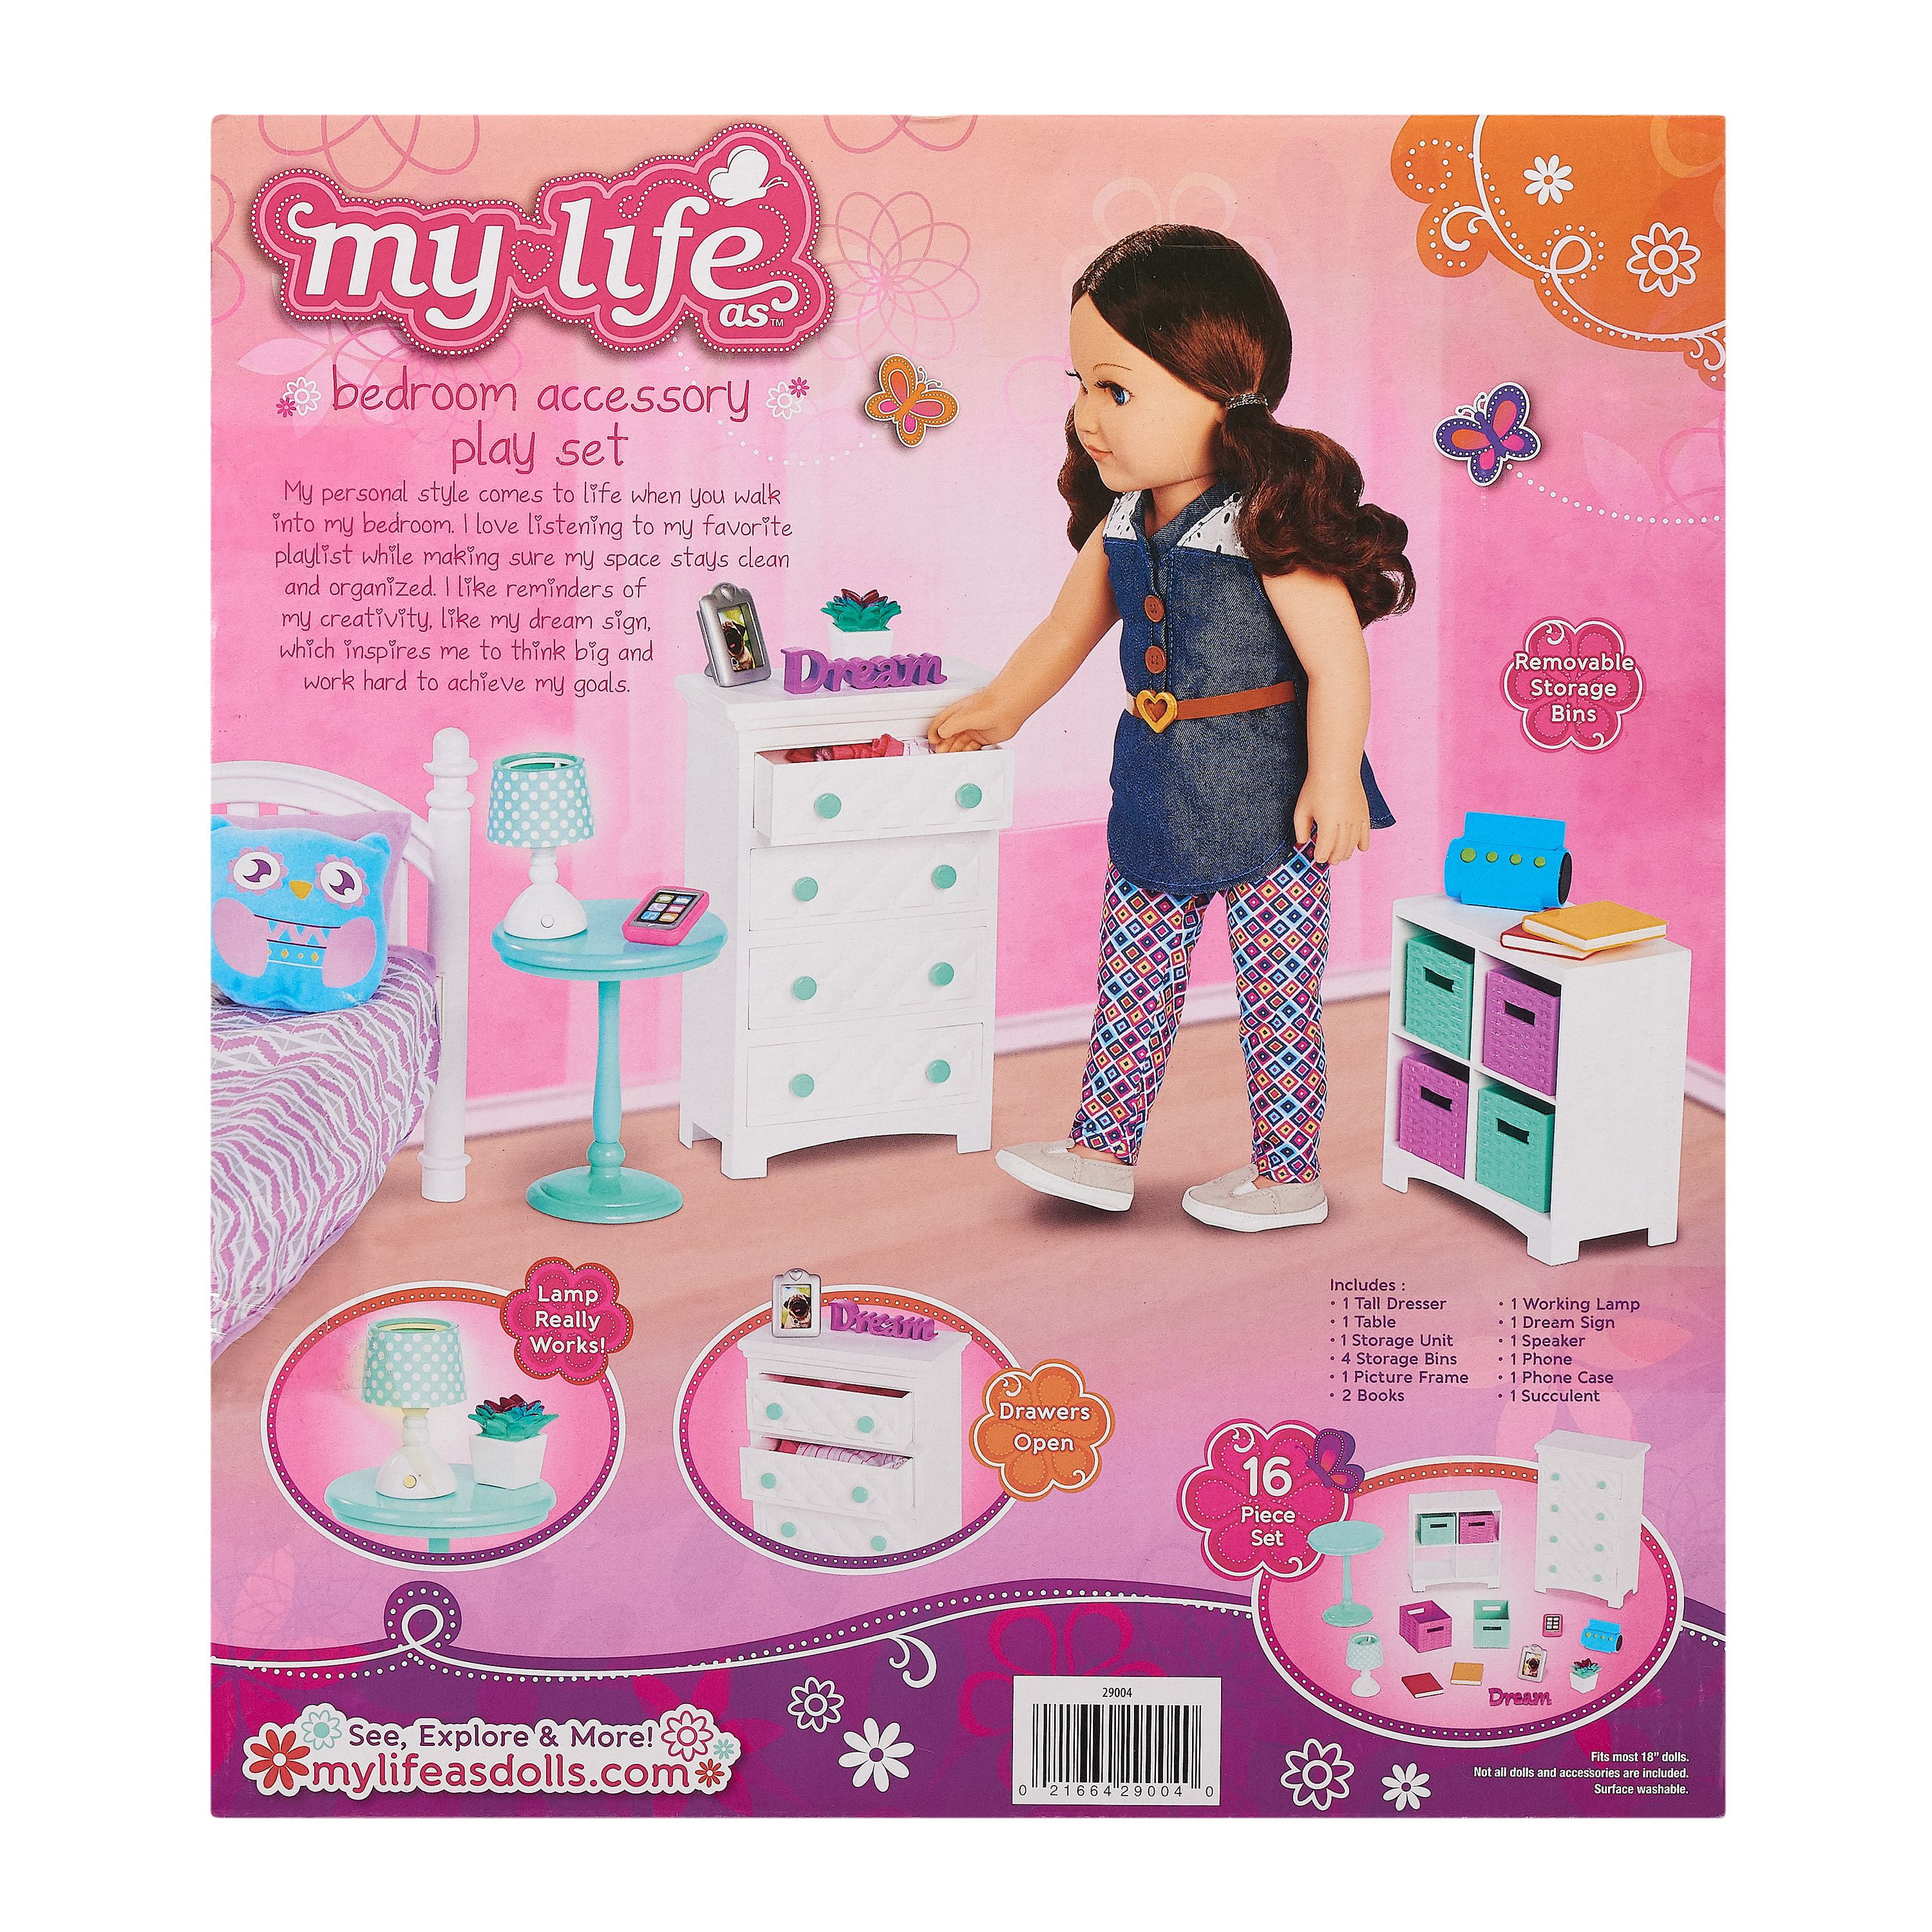 Details about   American My Life As Flower Garden Play Set 18" Doll Accessories 11 Piece lot new 